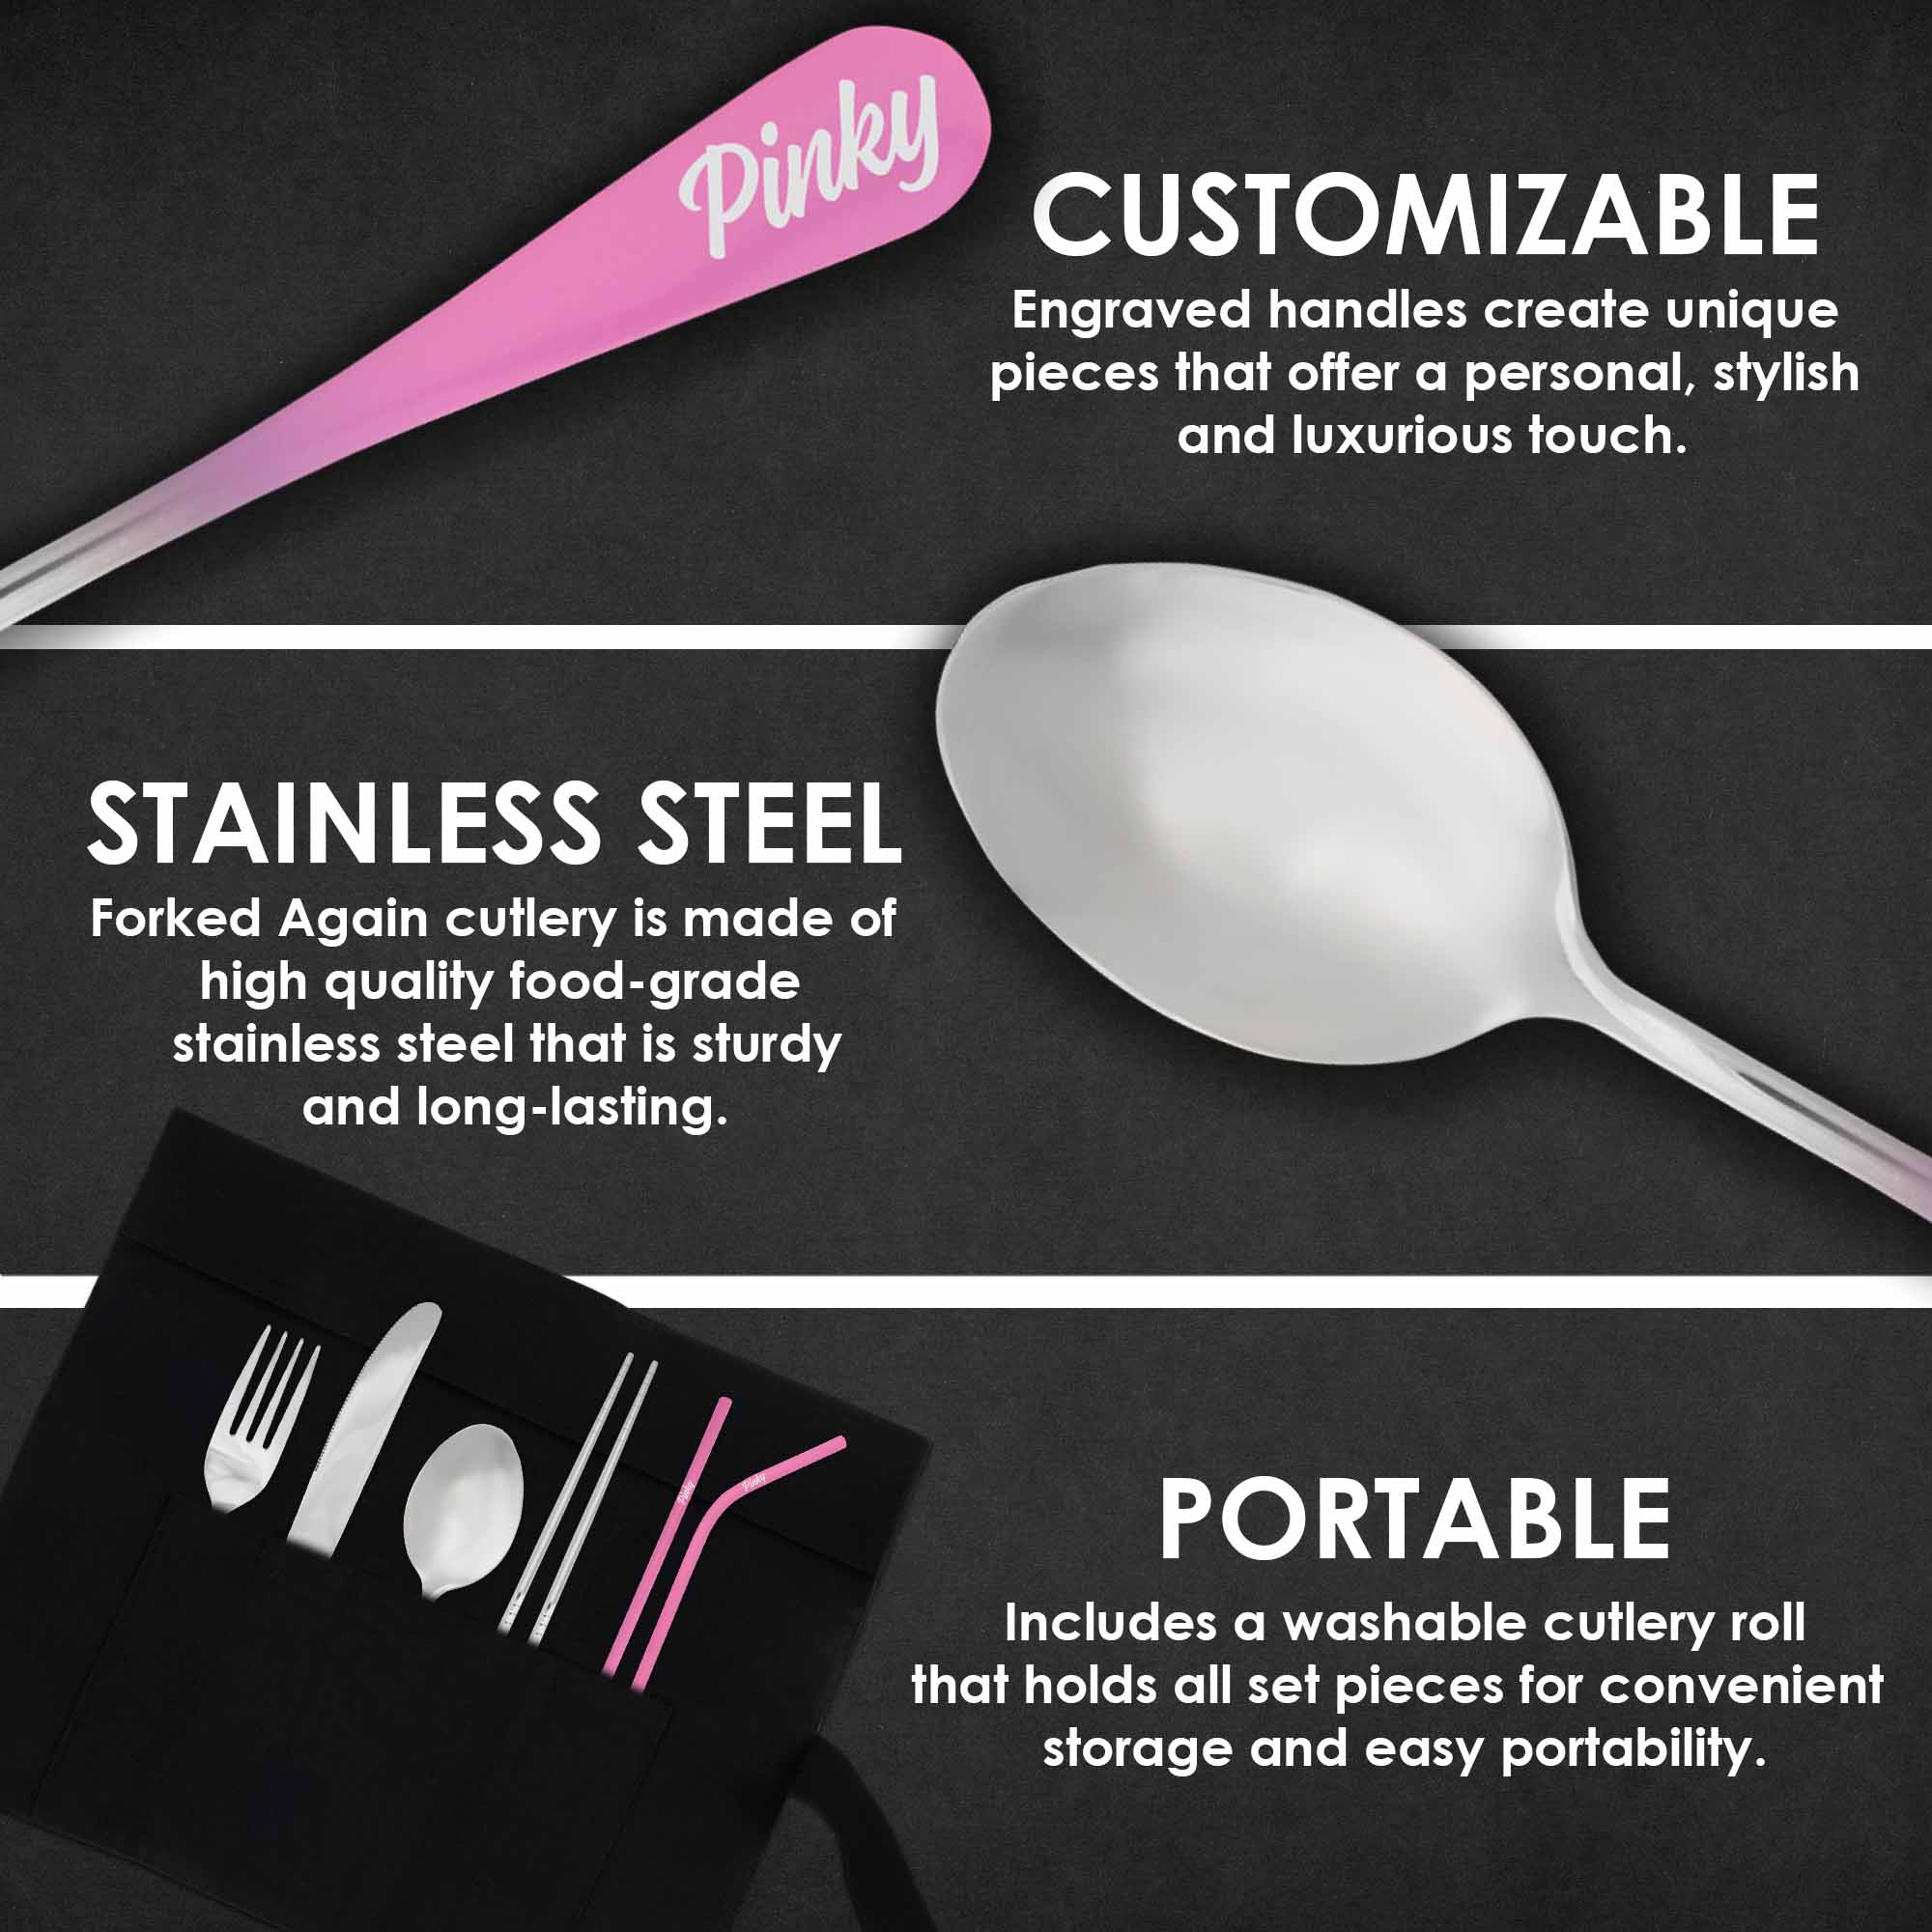 How to Build a Travel Silverware Set